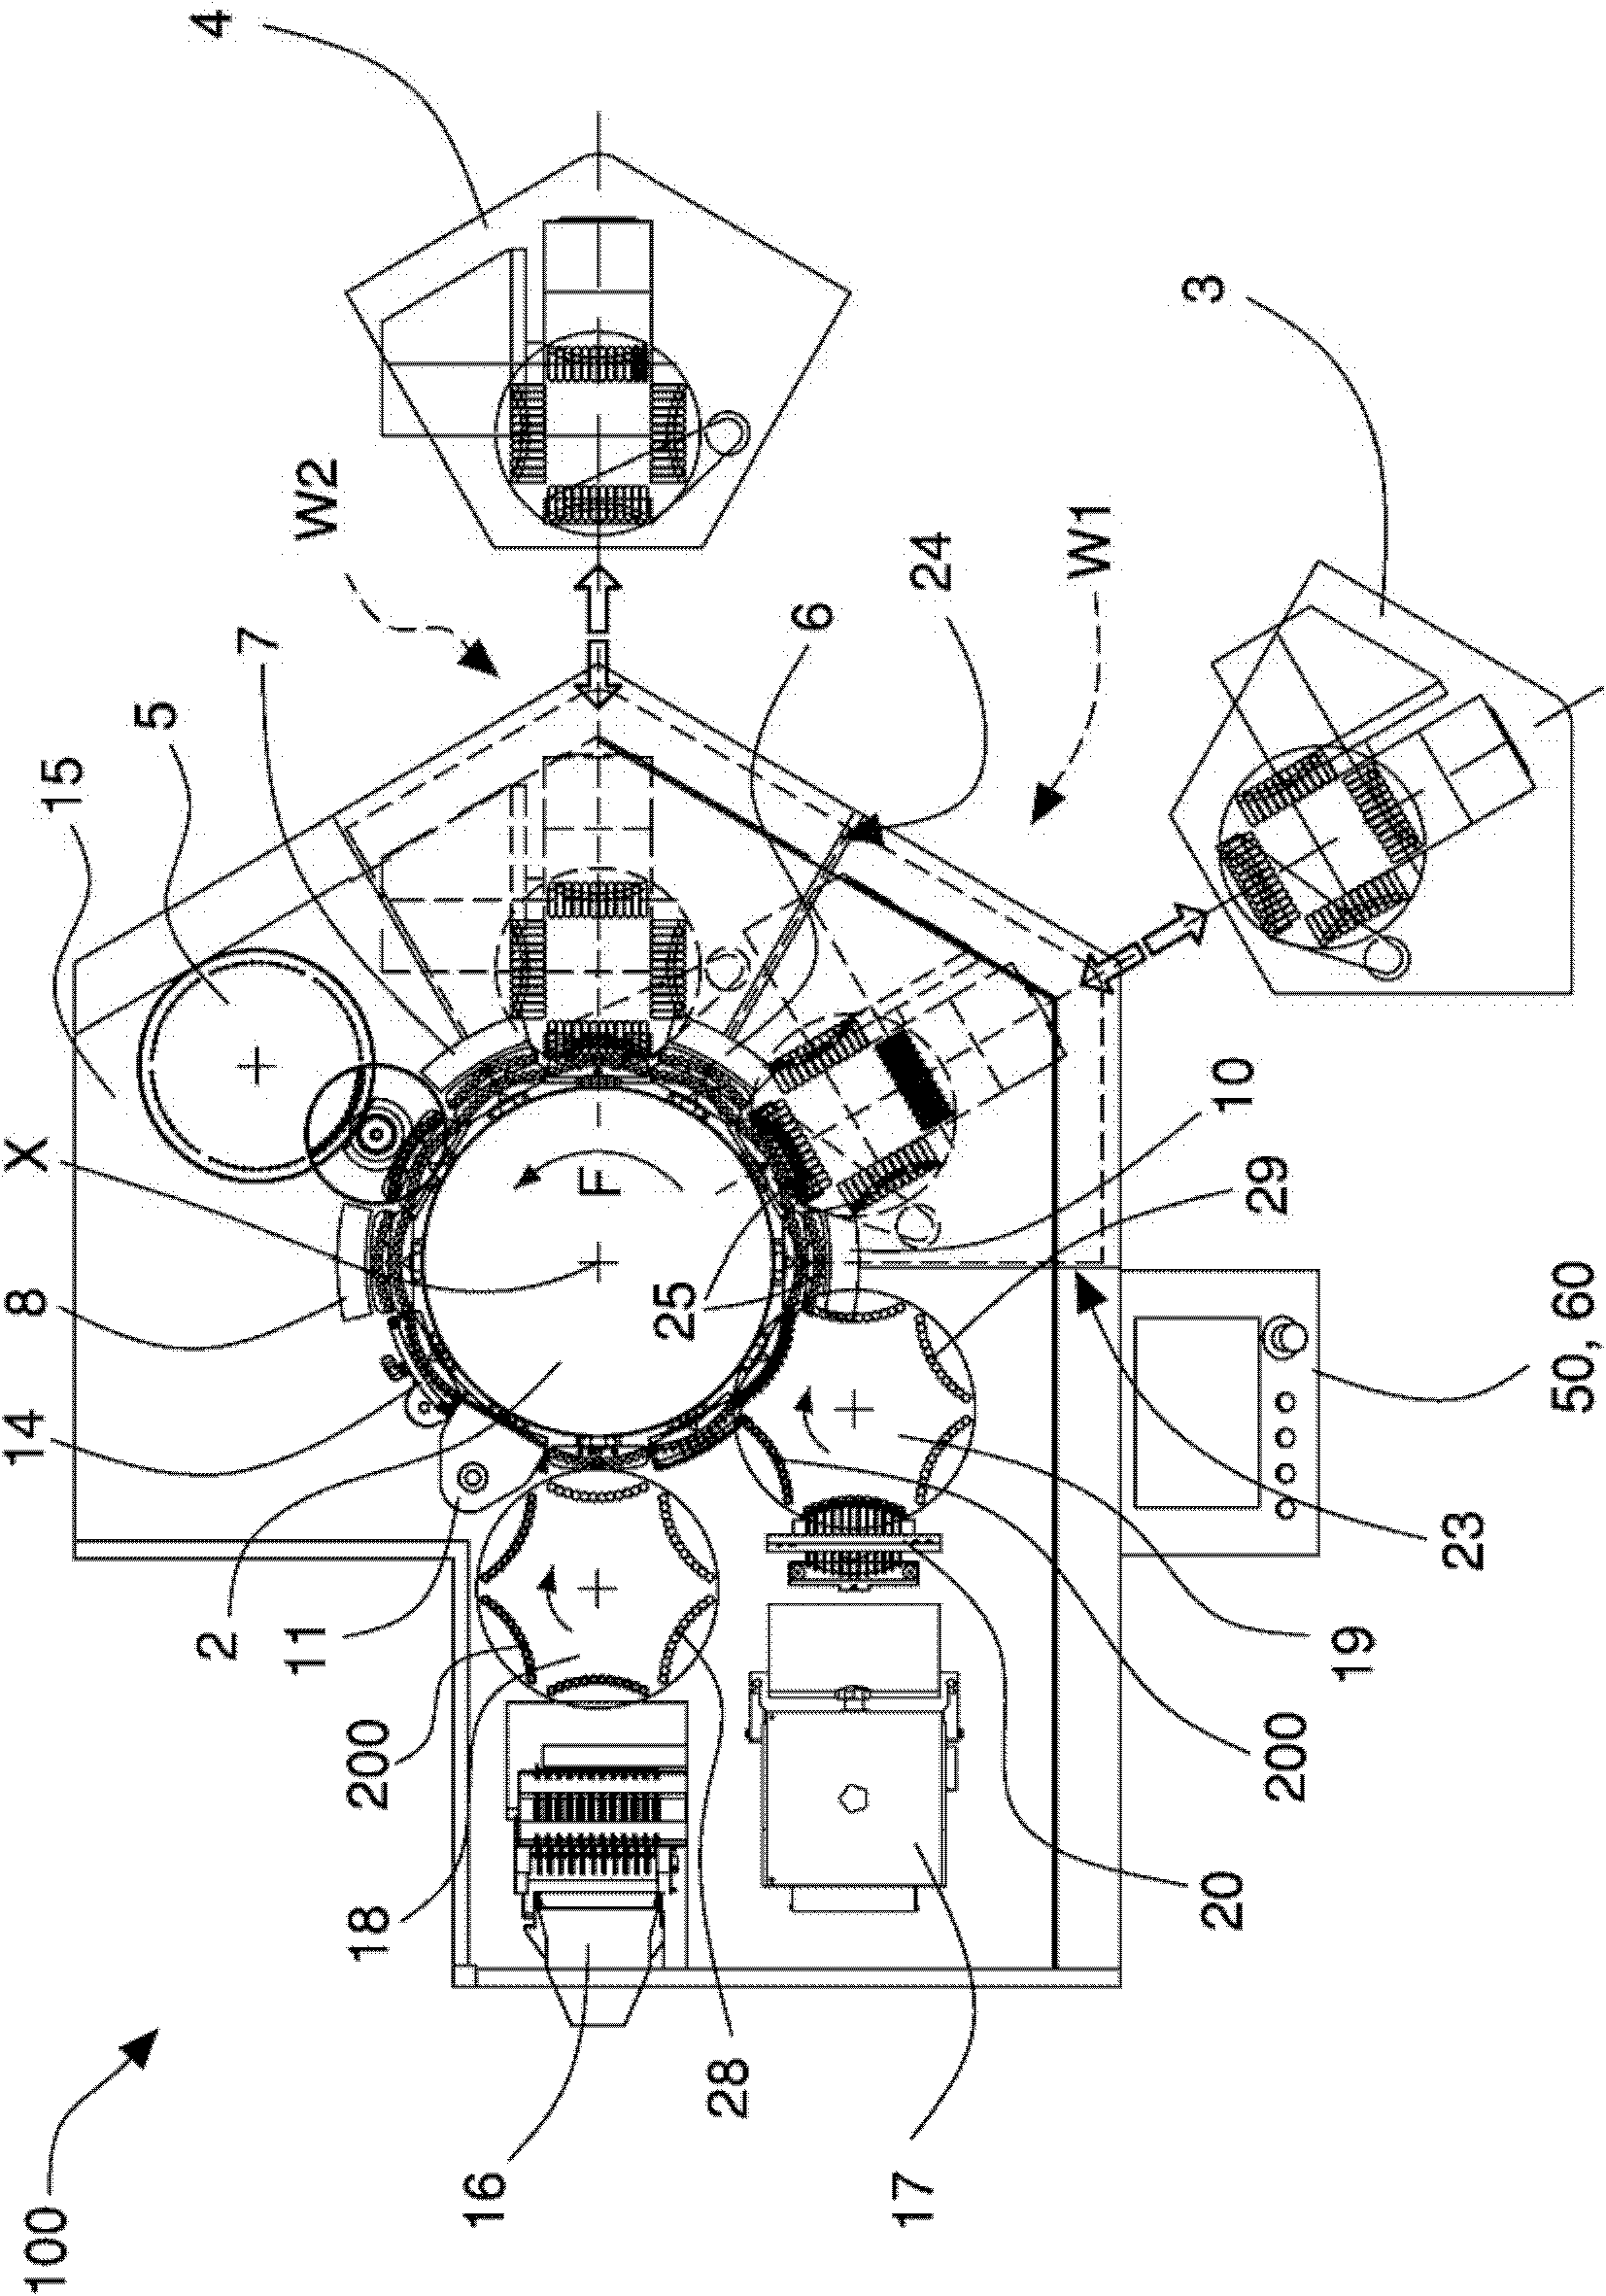 Machine and method for filling and checking capsules